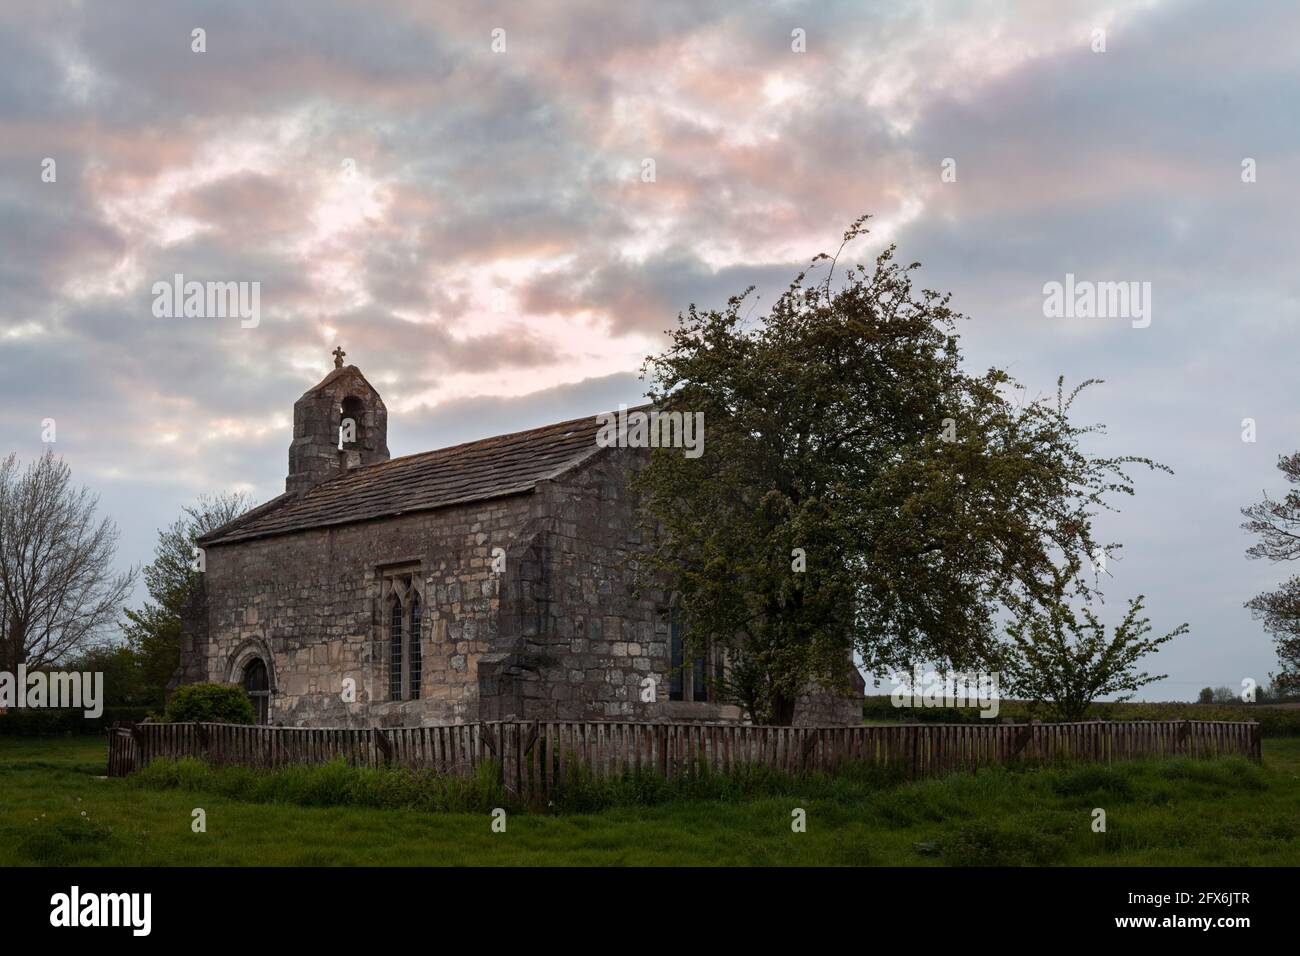 The ancient small Church on the site of the Village Of Lead.On Towton Moor where the biggest battle on English soil was ever fought. Stock Photo